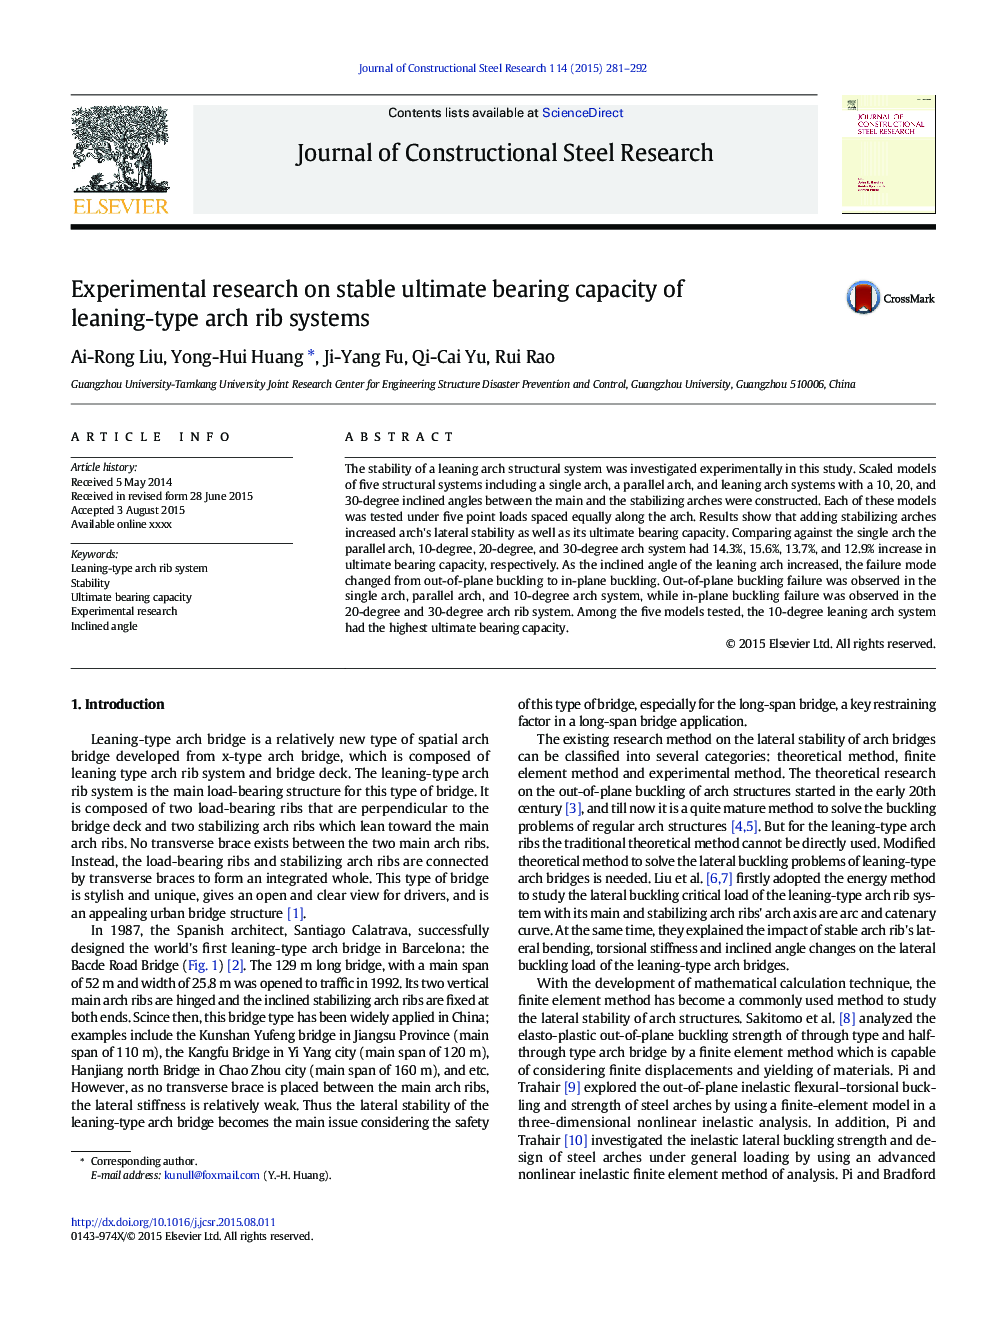 Experimental research on stable ultimate bearing capacity of leaning-type arch rib systems